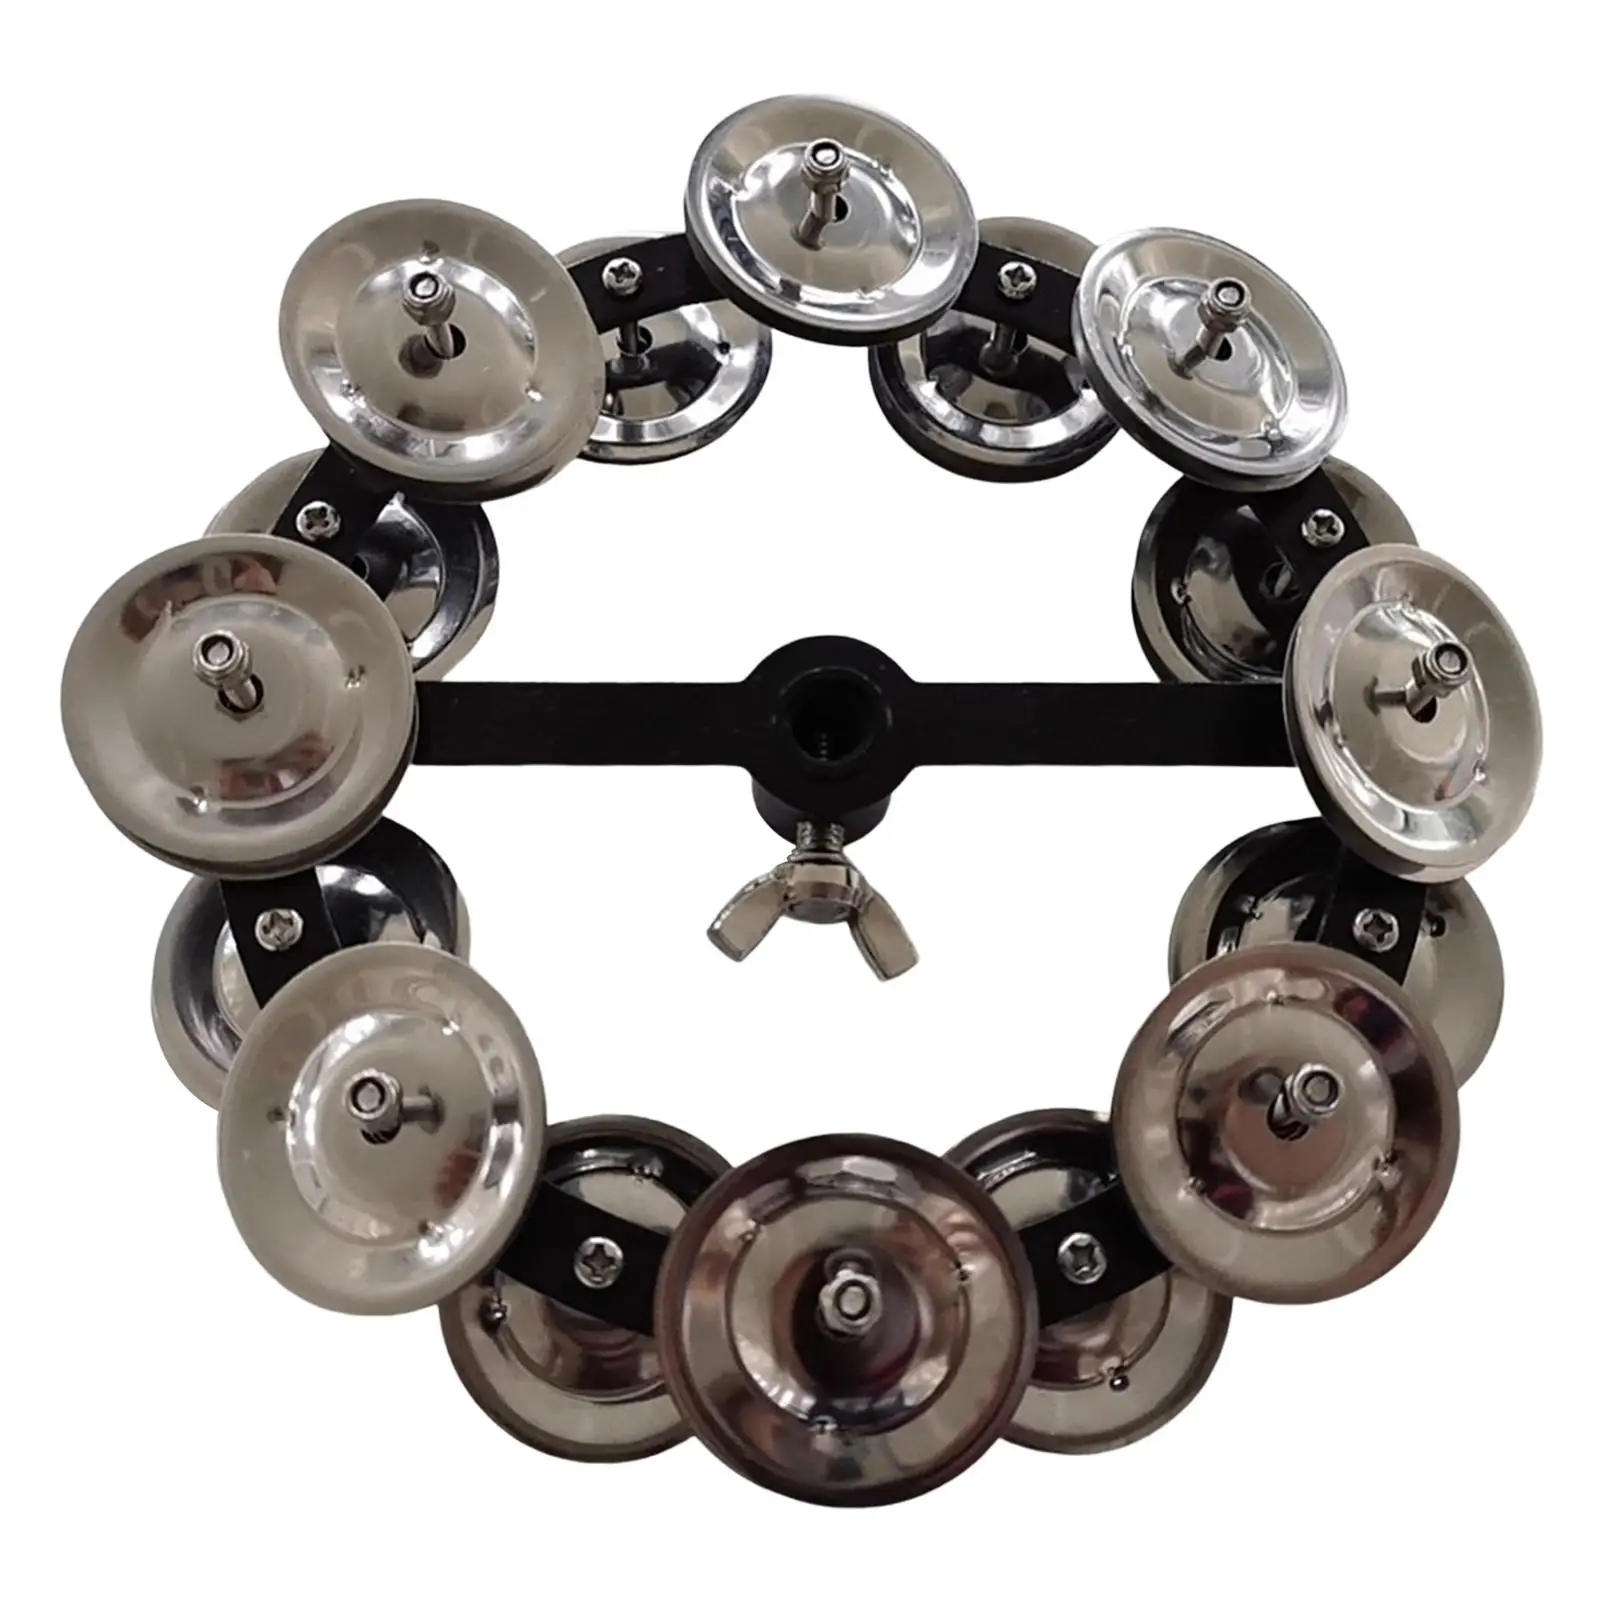 Musical Hi Hat Tambourine Hand Held Percussion Metal Shaker with Double Row Music Rhythm Tambourine for Band Ensemble Parties